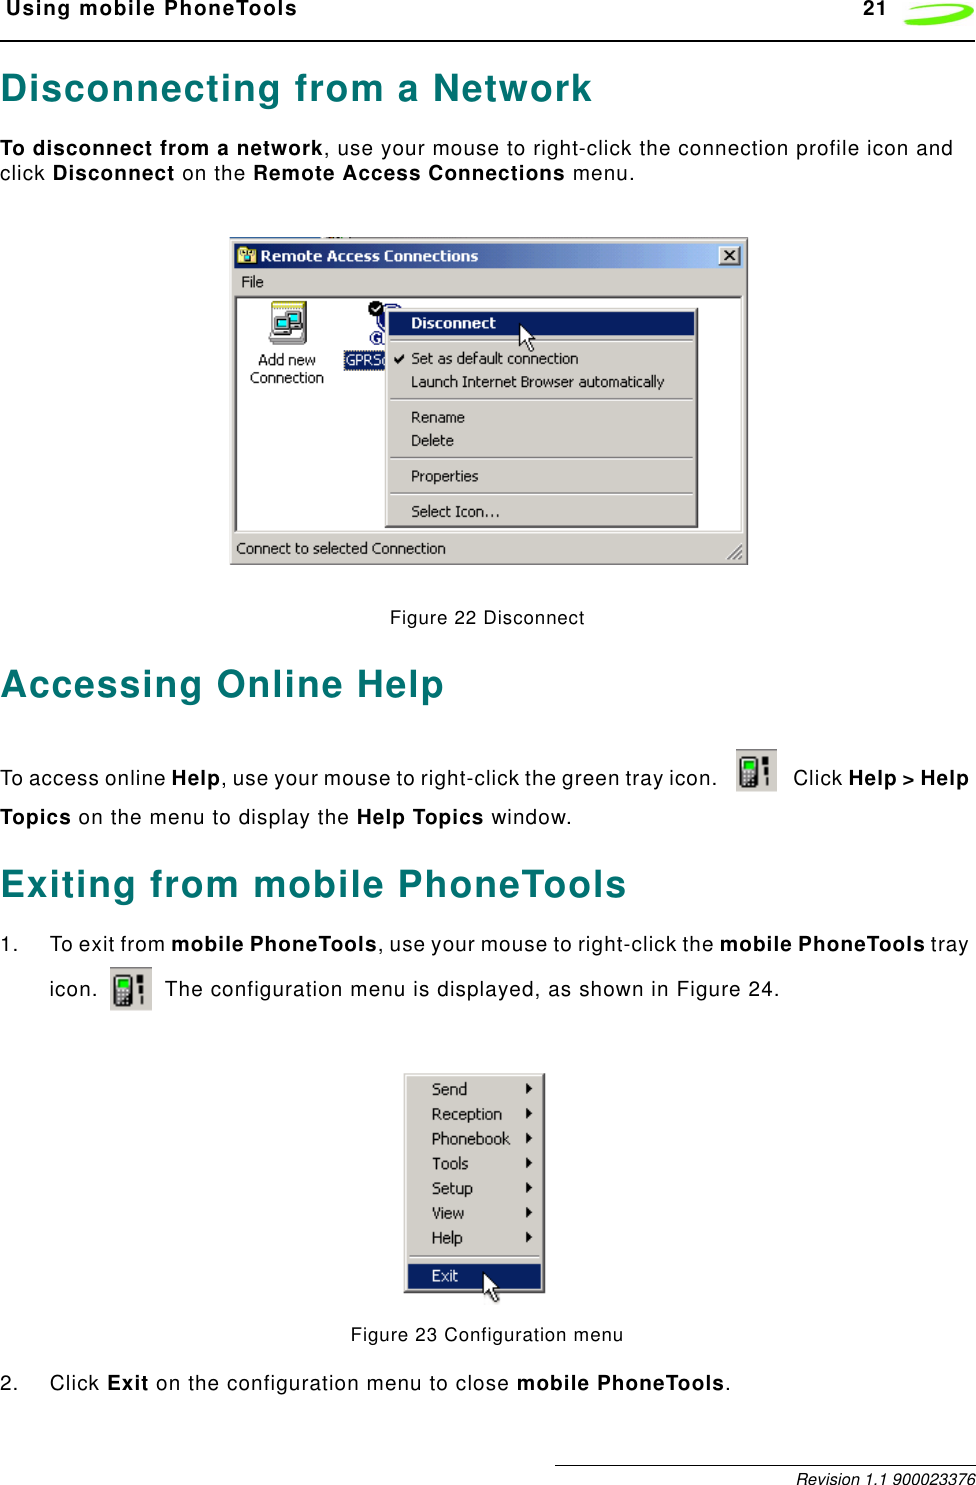  Using mobile PhoneTools 21 Revision 1.1 900023376Disconnecting from a NetworkTo disconnect from a network, use your mouse to right-click the connection profile icon and click Disconnect on the Remote Access Connections menu.Figure 22 DisconnectAccessing Online HelpTo access online Help, use your mouse to right-click the green tray icon.   Click Help &gt; Help Topics on the menu to display the Help Topics window.Exiting from mobile PhoneTools1. To exit from mobile PhoneTools, use your mouse to right-click the mobile PhoneTools tray icon.   The configuration menu is displayed, as shown in Figure 24.Figure 23 Configuration menu2. Click Exit on the configuration menu to close mobile PhoneTools.